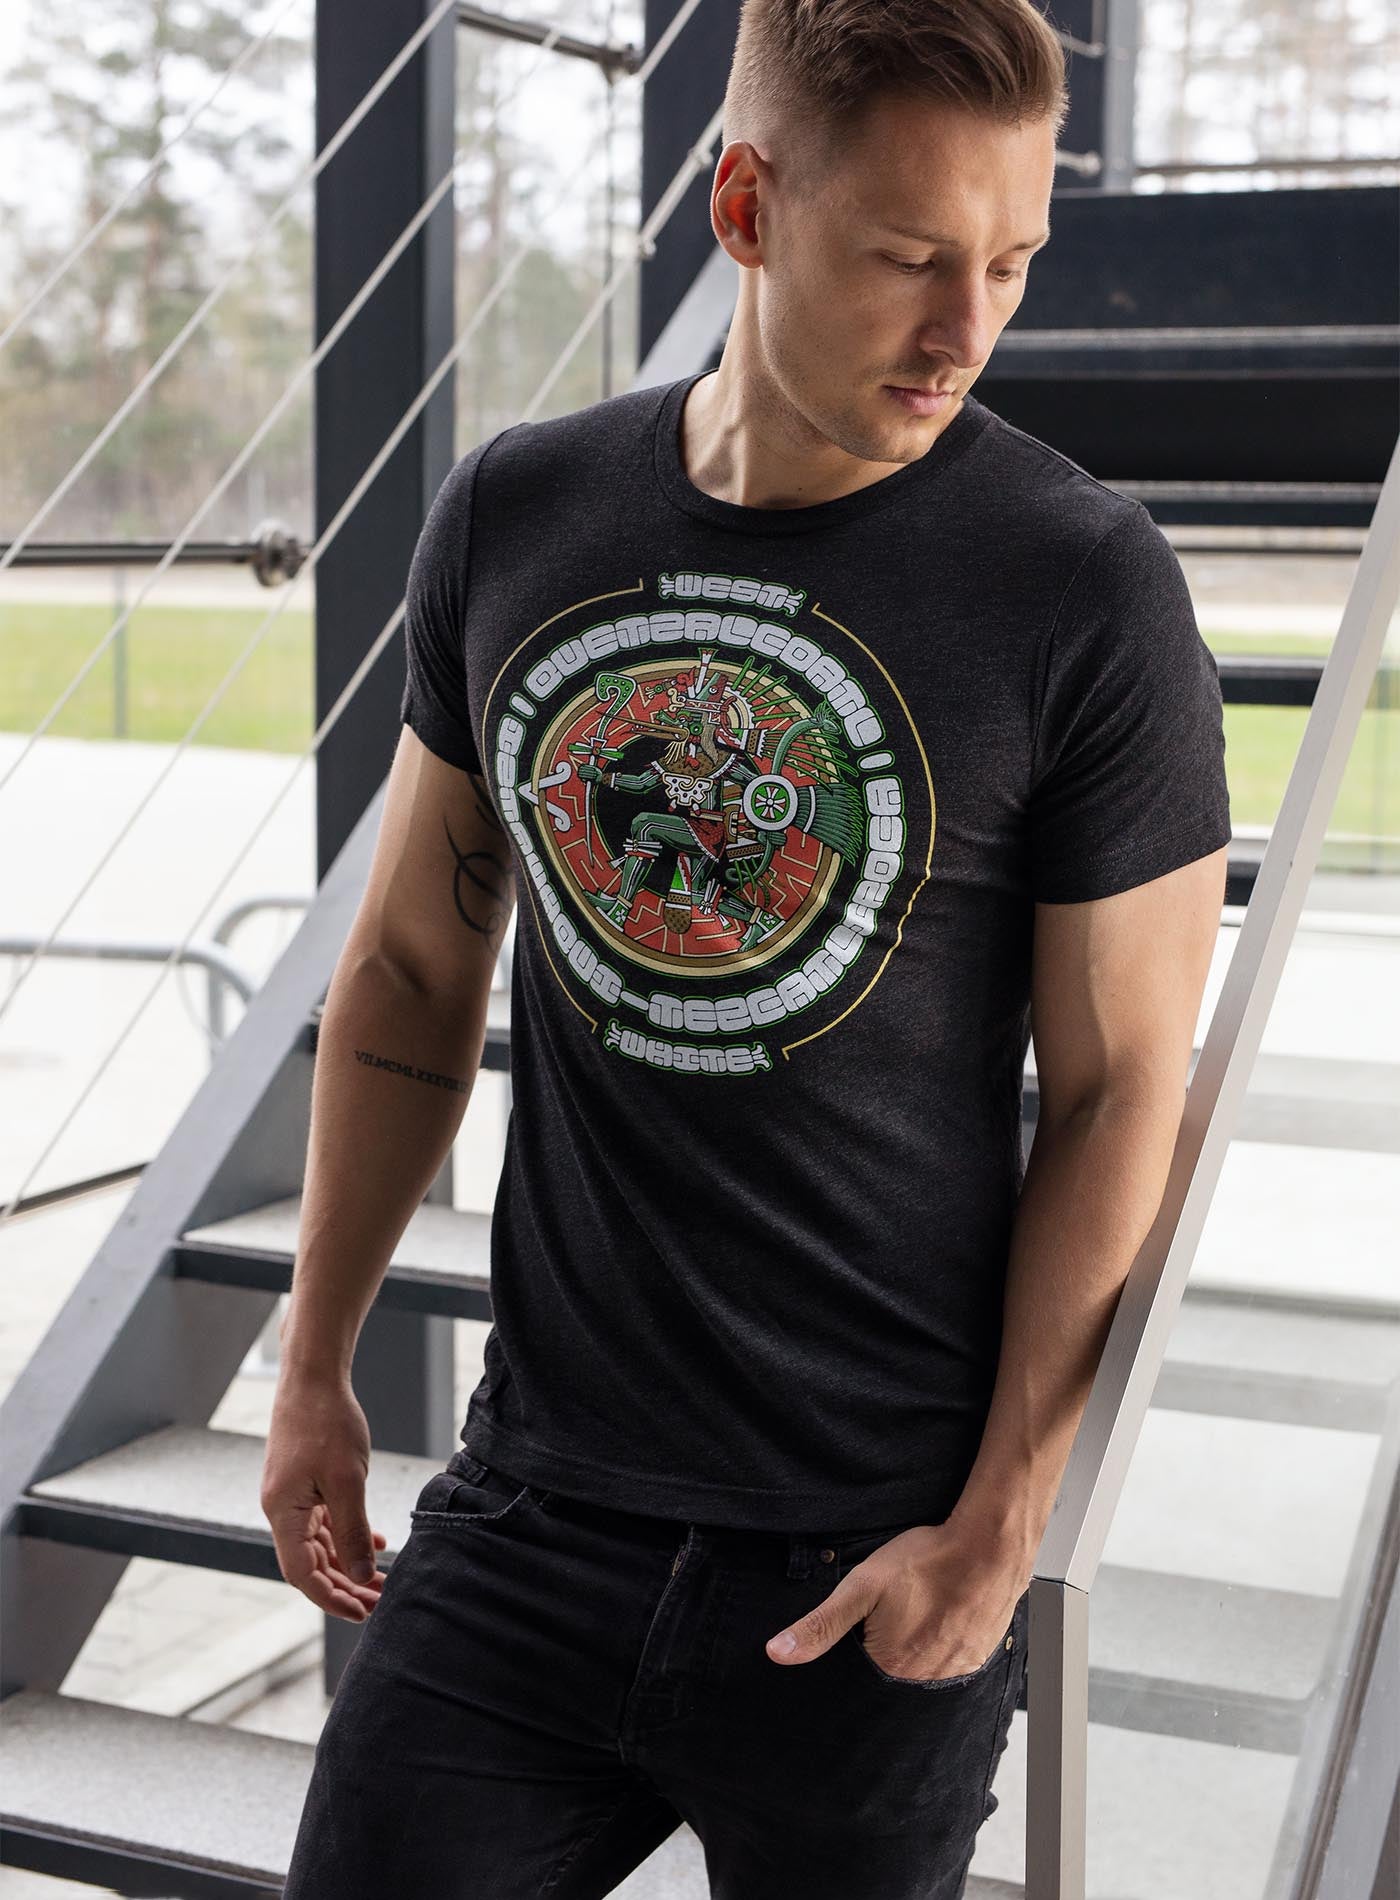 man modeling a Heather black unisex t-shirt featuring a front print of the toltec-aztec god Tezcatlipoca also known as Quetzalcoatl. Reinterpretation by Mexican illustrator G.M. Meave.